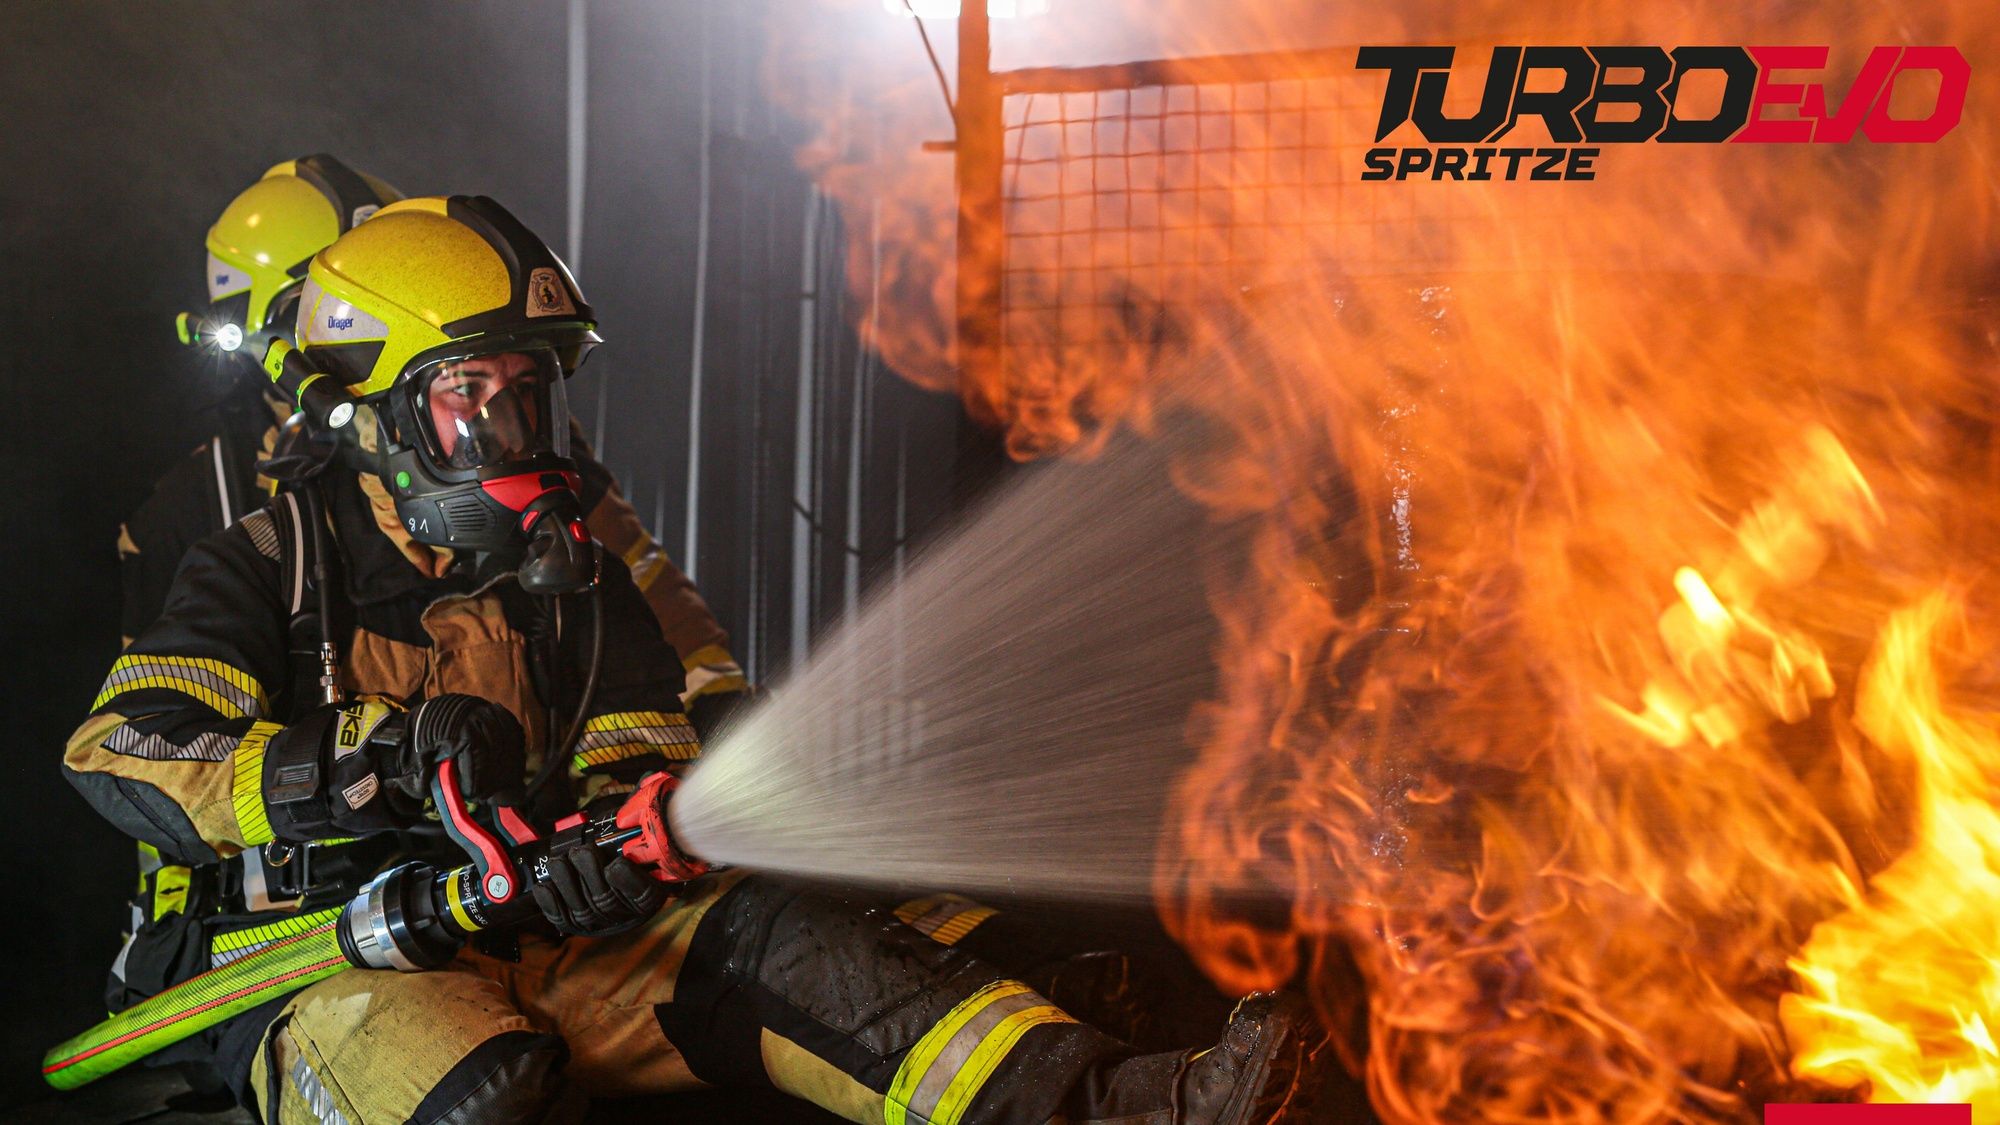 Fire department extinguishes fire with AWG EVO turbo sprayer